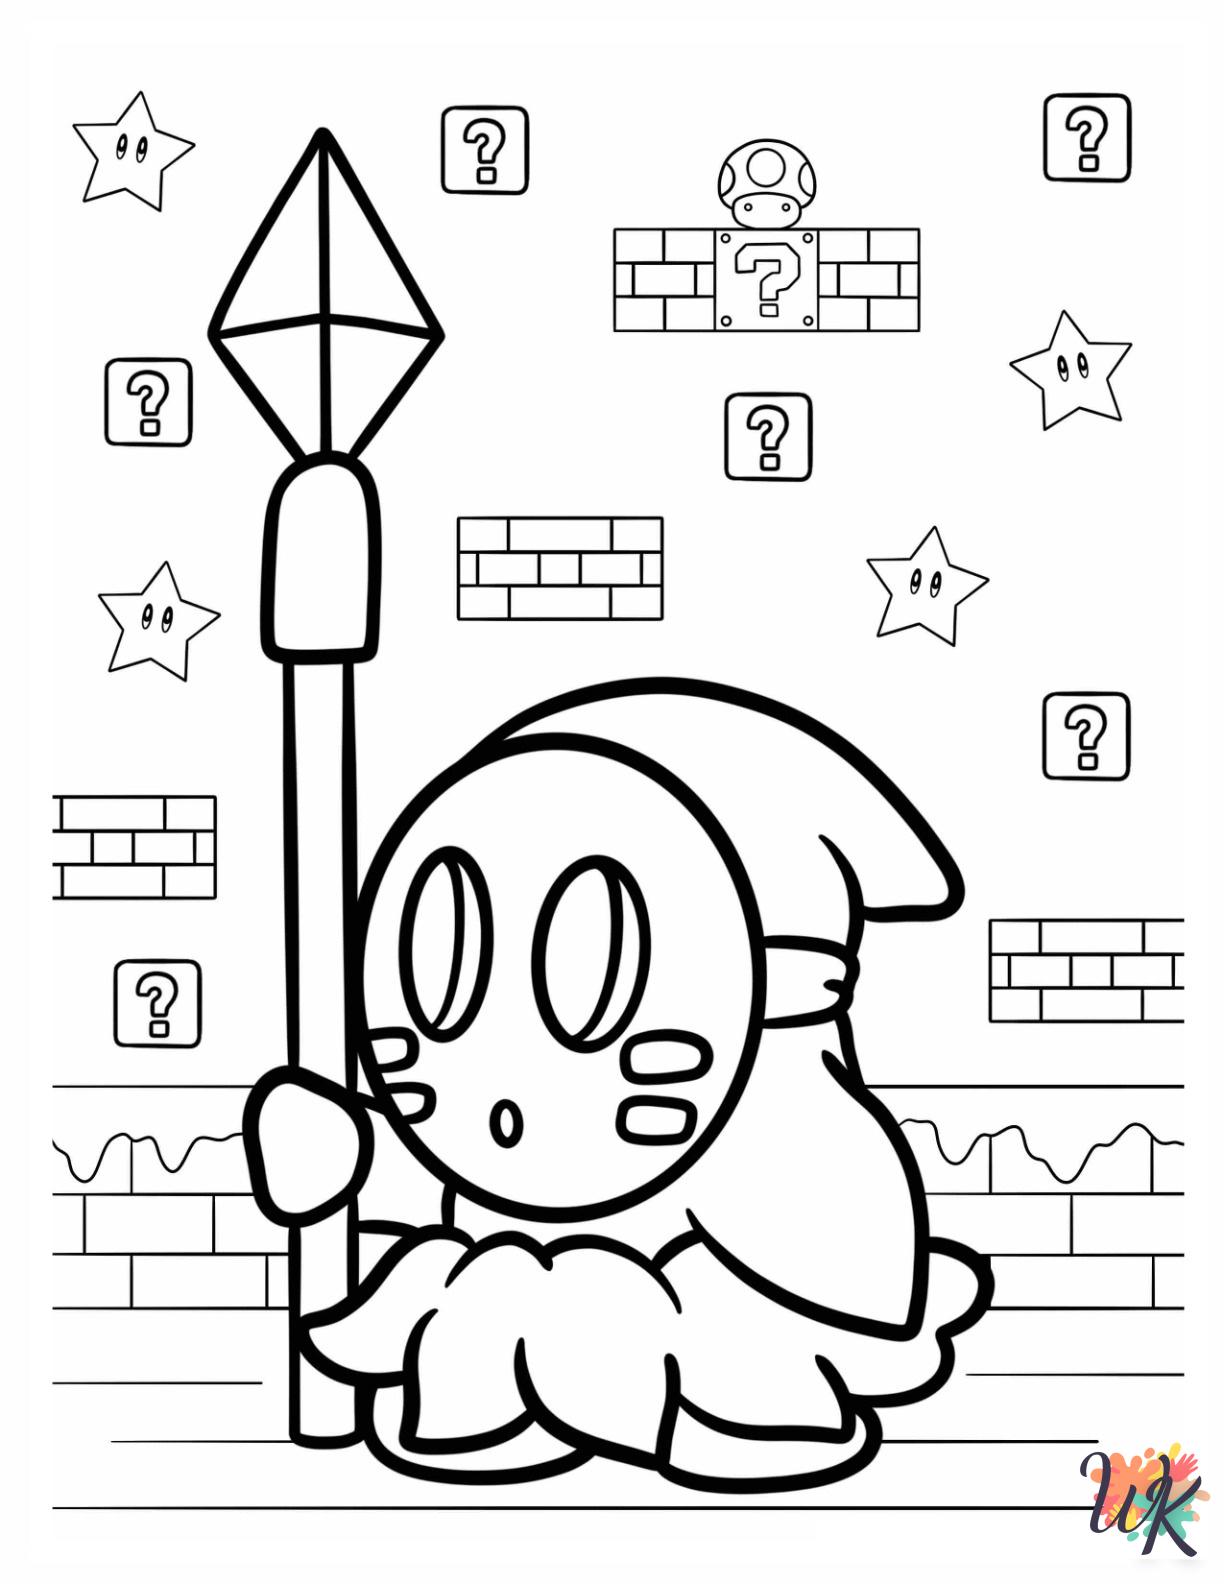 Shy Guy coloring pages for adults easy